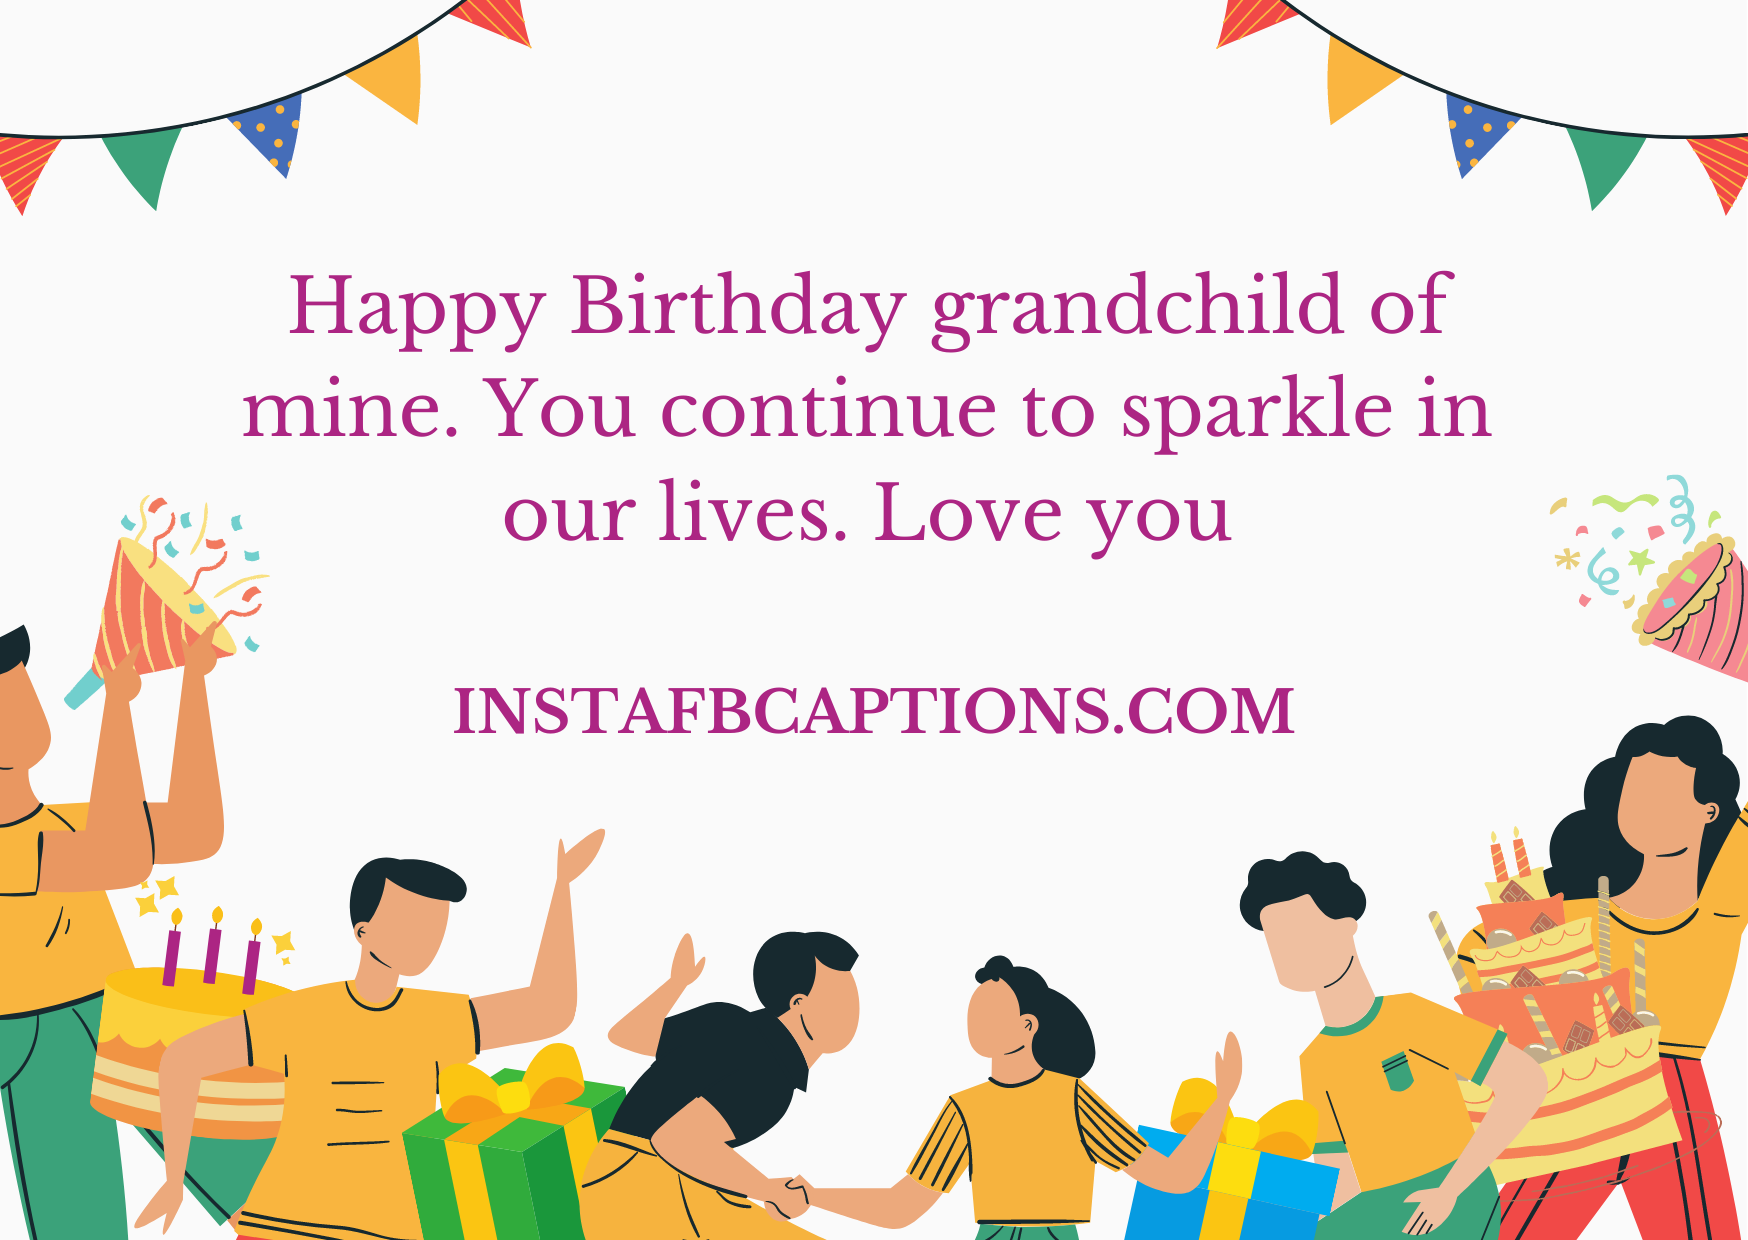 Lovely 5th Birthday Captions For Grandchild  - Lovely 5th Birthday Captions for Grandchild - 5th Birthday Captions for Son/Daughter in 2023